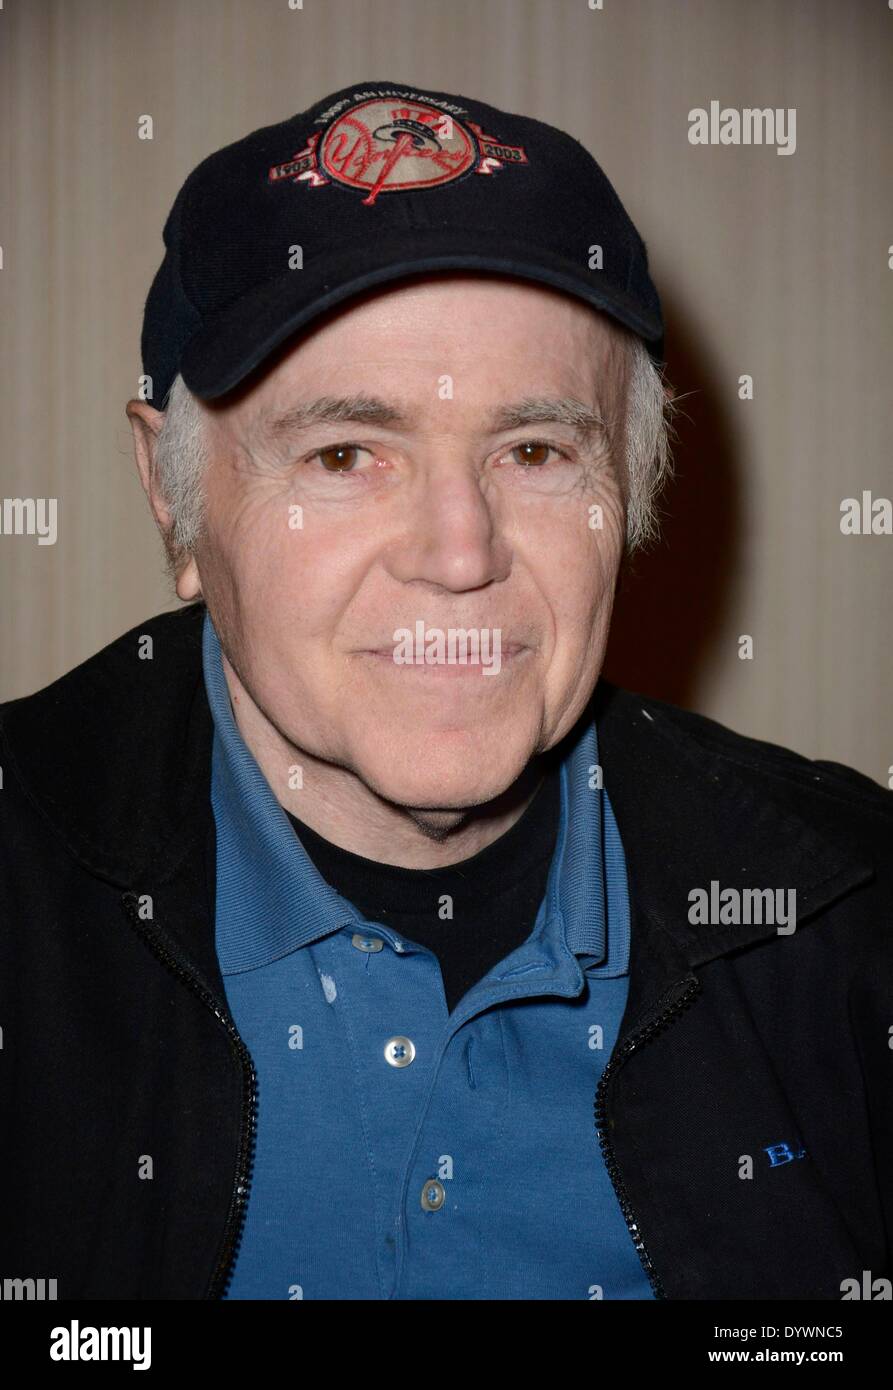 Parsippany, NJ, USA. 25th Apr, 2014. Walter Koenig in attendance for Chiller Theatre Toy, Model and Film Expo, Sheraton Hotel, Parsippany, NJ April 25, 2014. Credit:  Derek Storm/Everett Collection/Alamy Live News Stock Photo